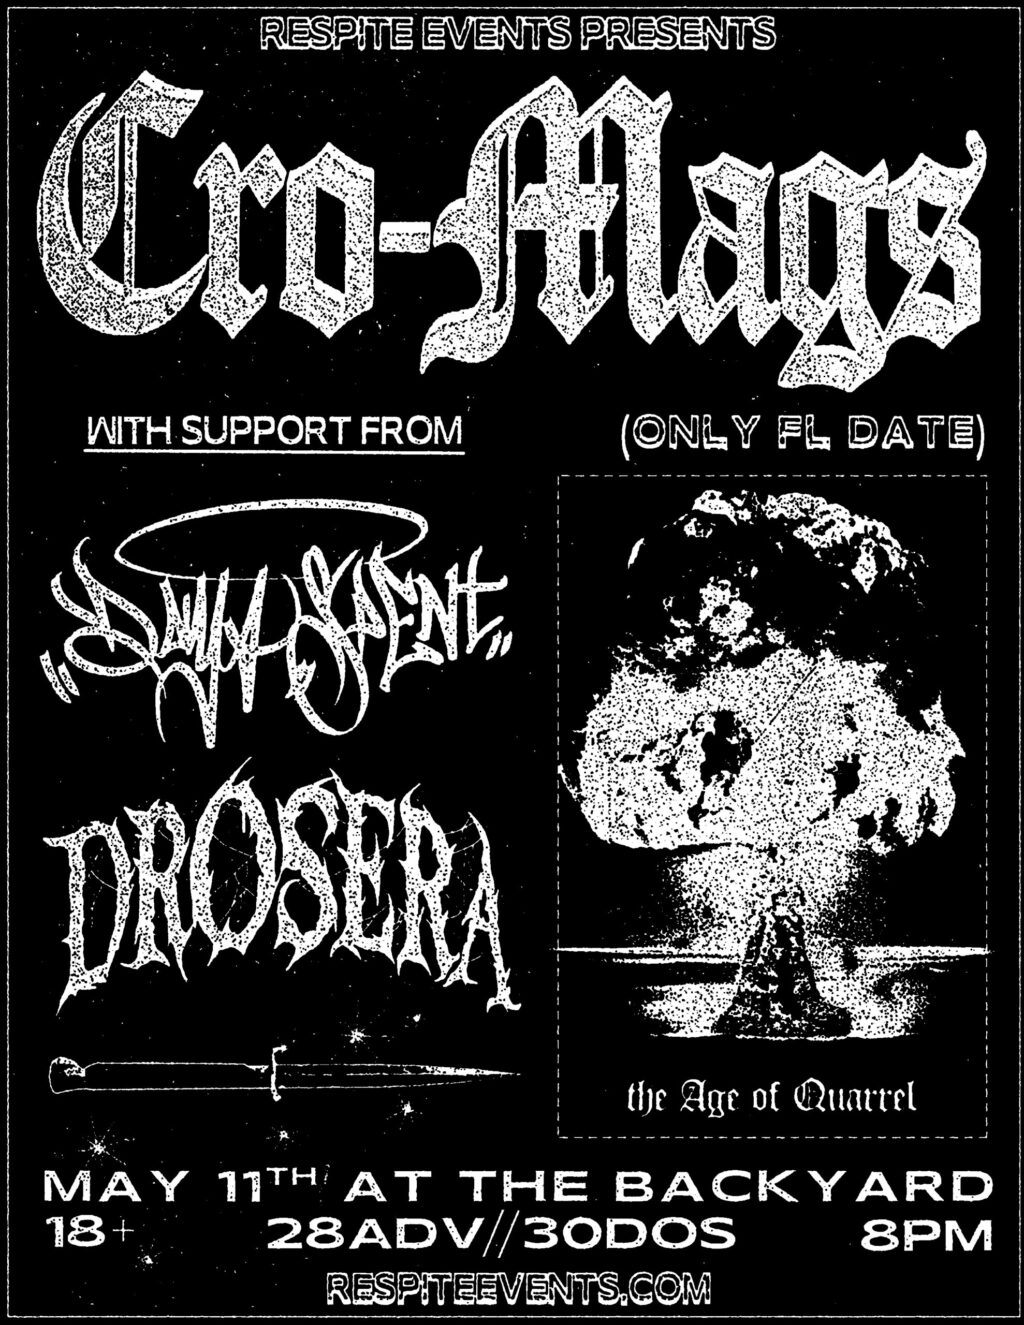 Cro-Mags (only FL date) Days Spent Drosera 8 pm $28adv $30dos 18+ The Backyard Tickets at RespiteEvents.com